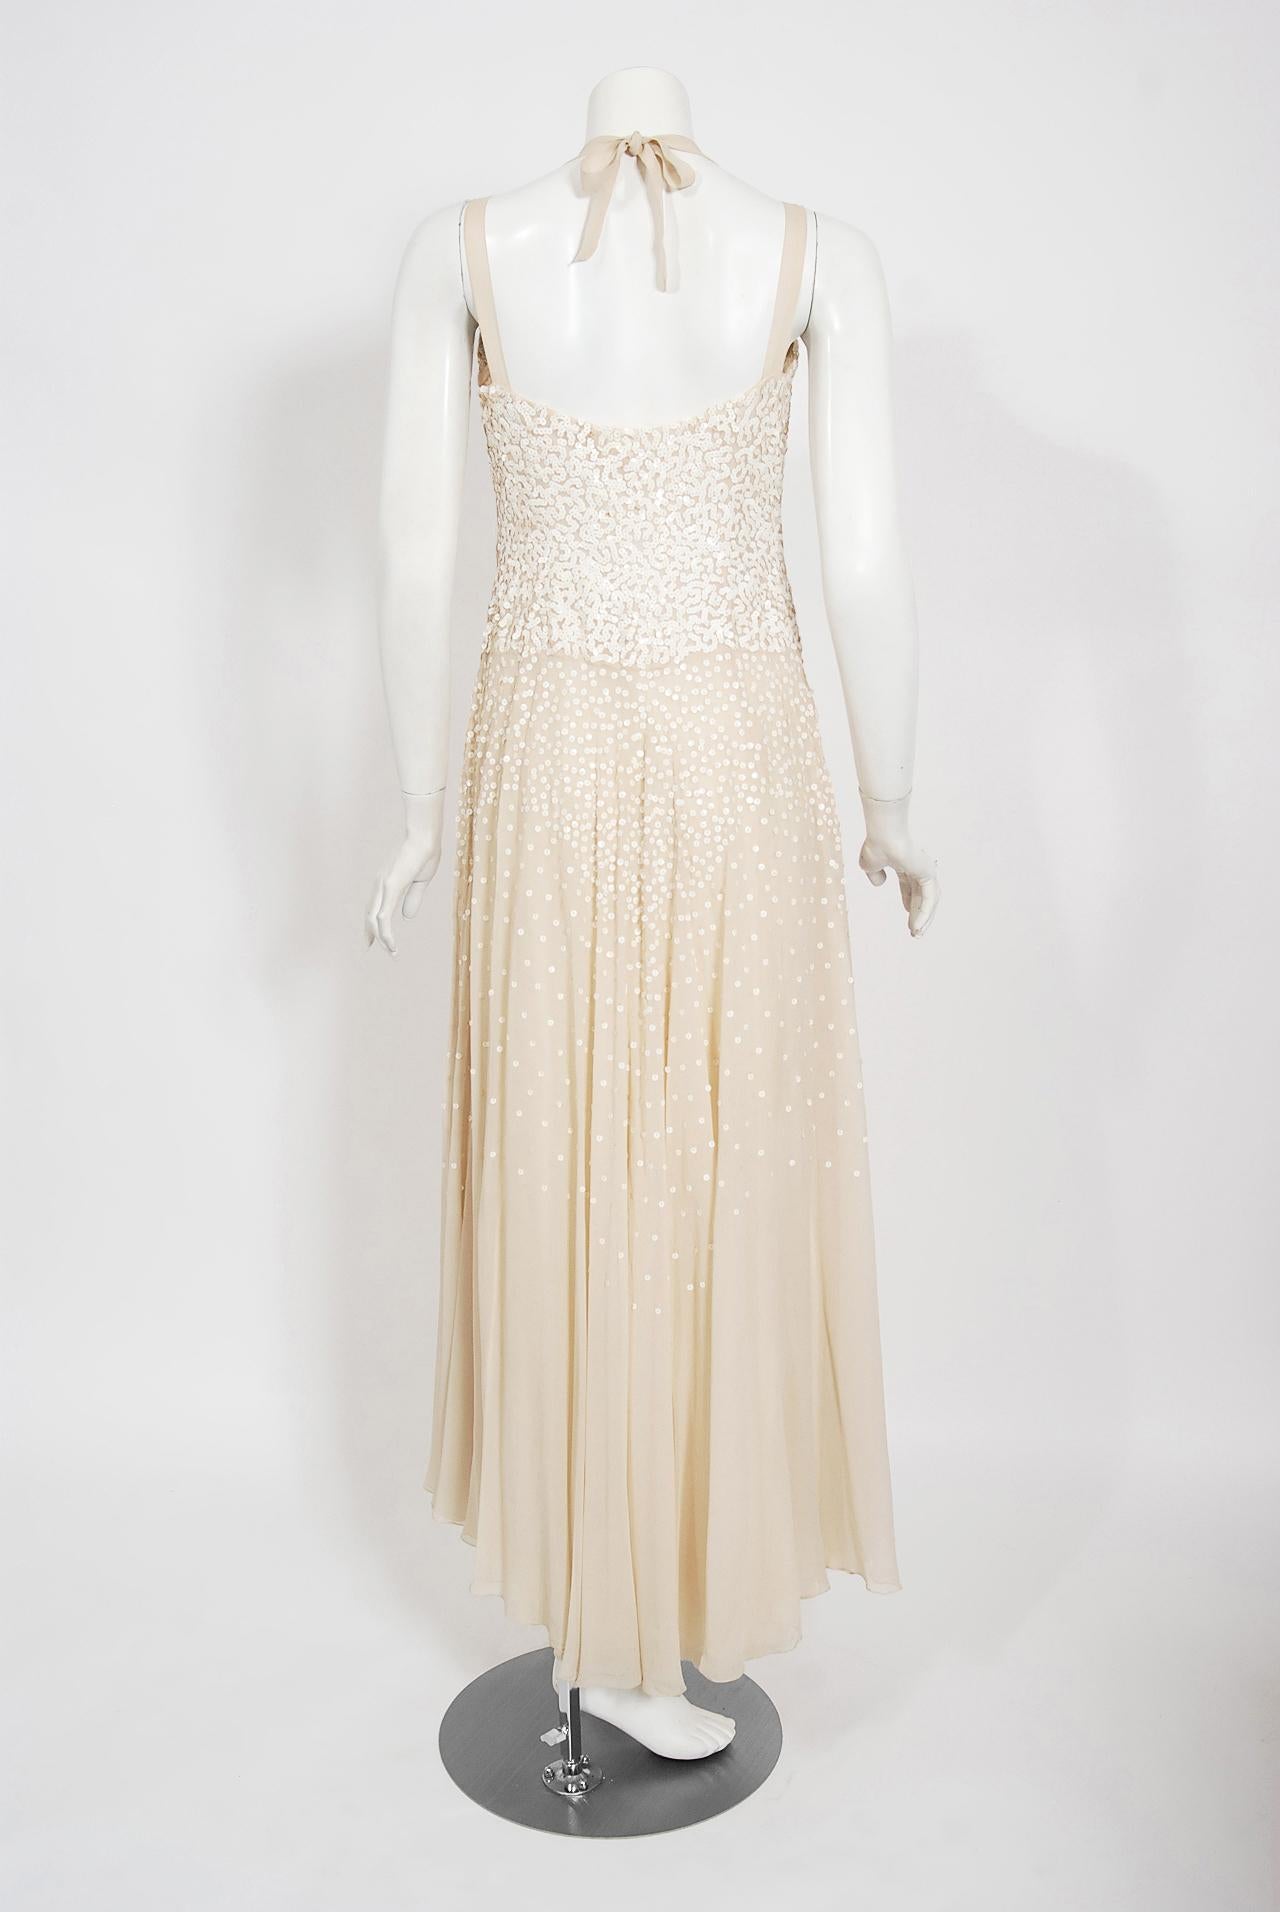 Vintage 1940's Harry Cooper of Hollywood Ivory Sequin Chiffon Halter Bridal Gown For Sale 2